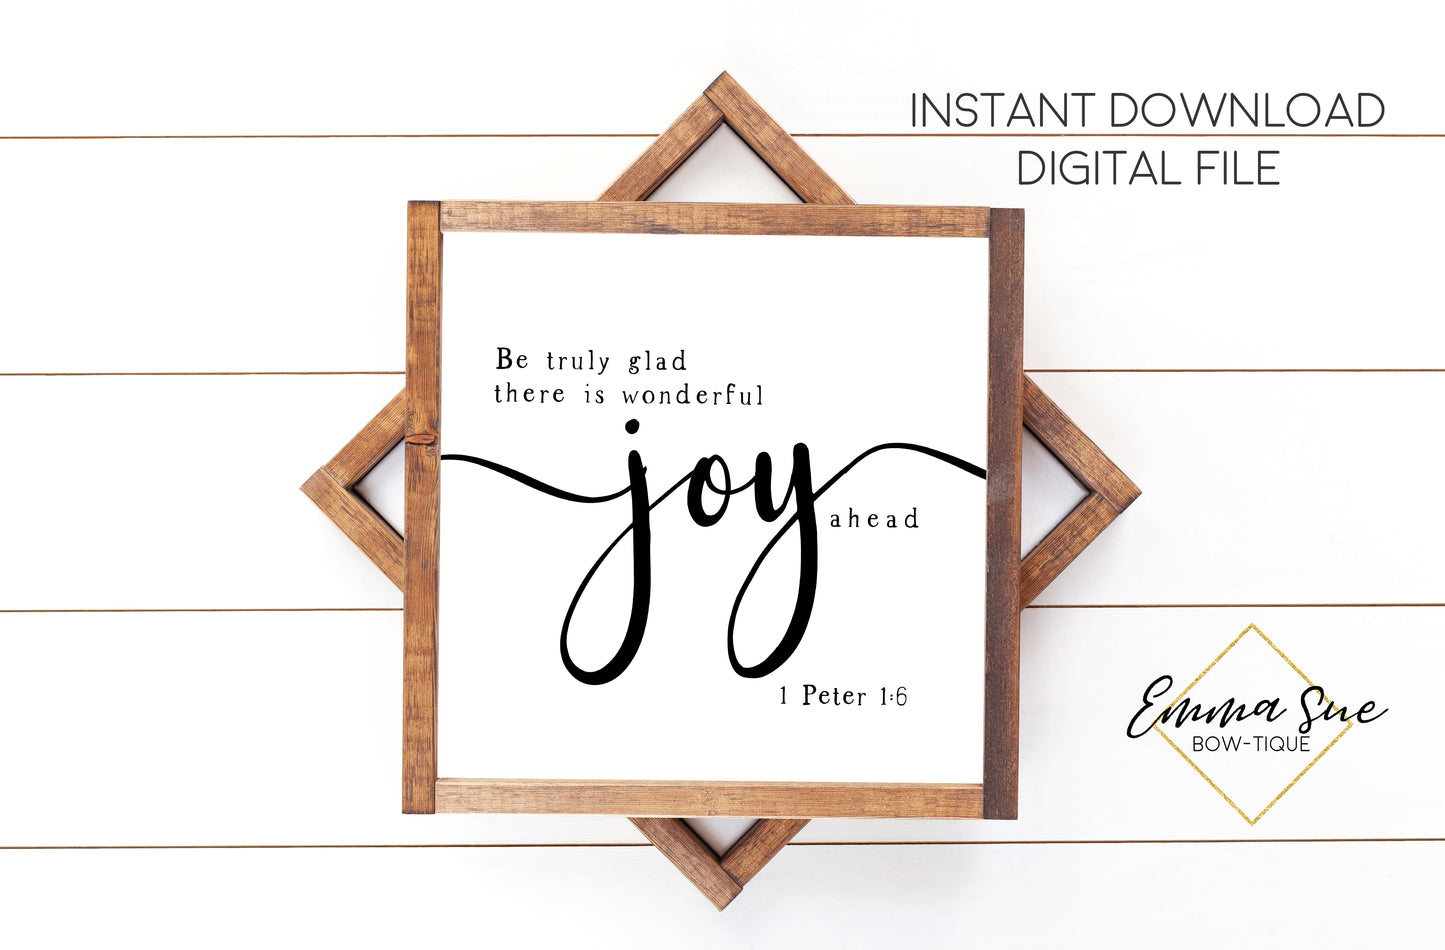 Be Truly Glad there is Wonderful Joy Ahead - 1 Peter 1:6 -  Christian Farmhouse Printable Art Sign Digital File